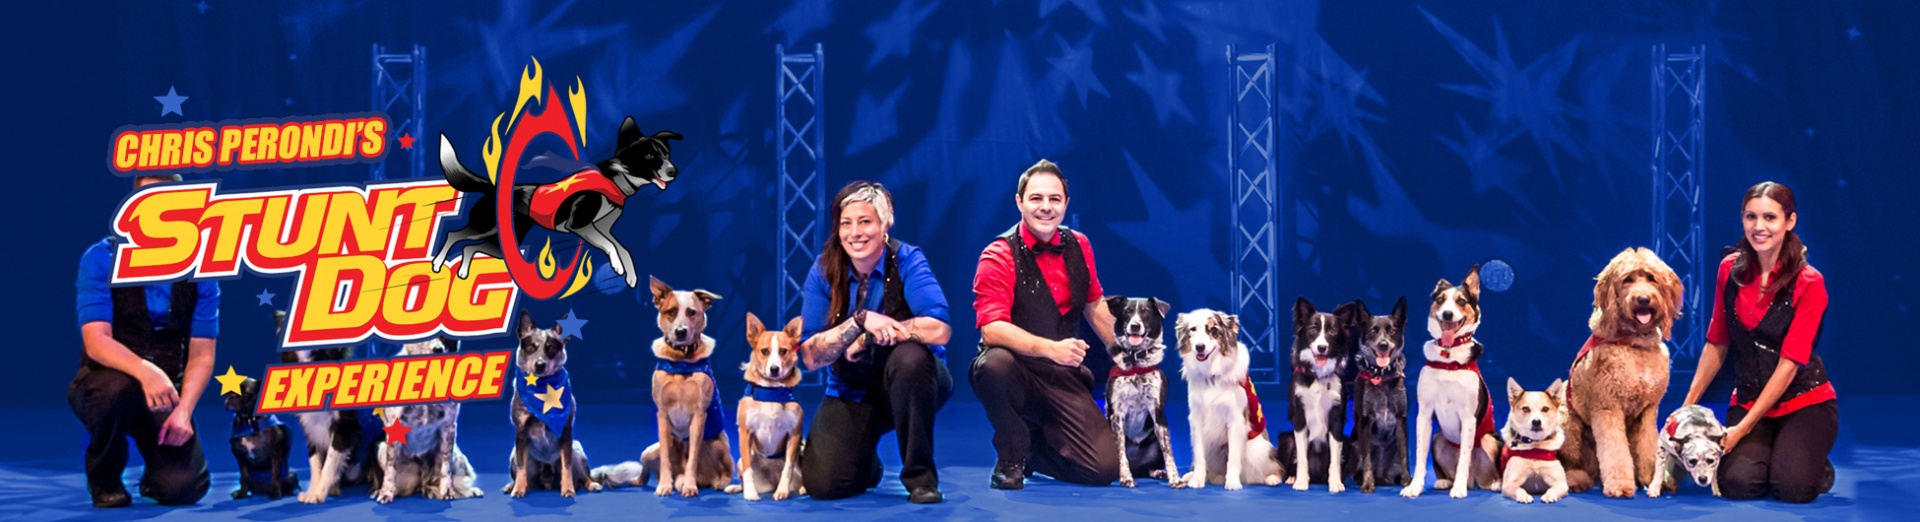 The trainers and dogs of the show lined up and posing on stage.